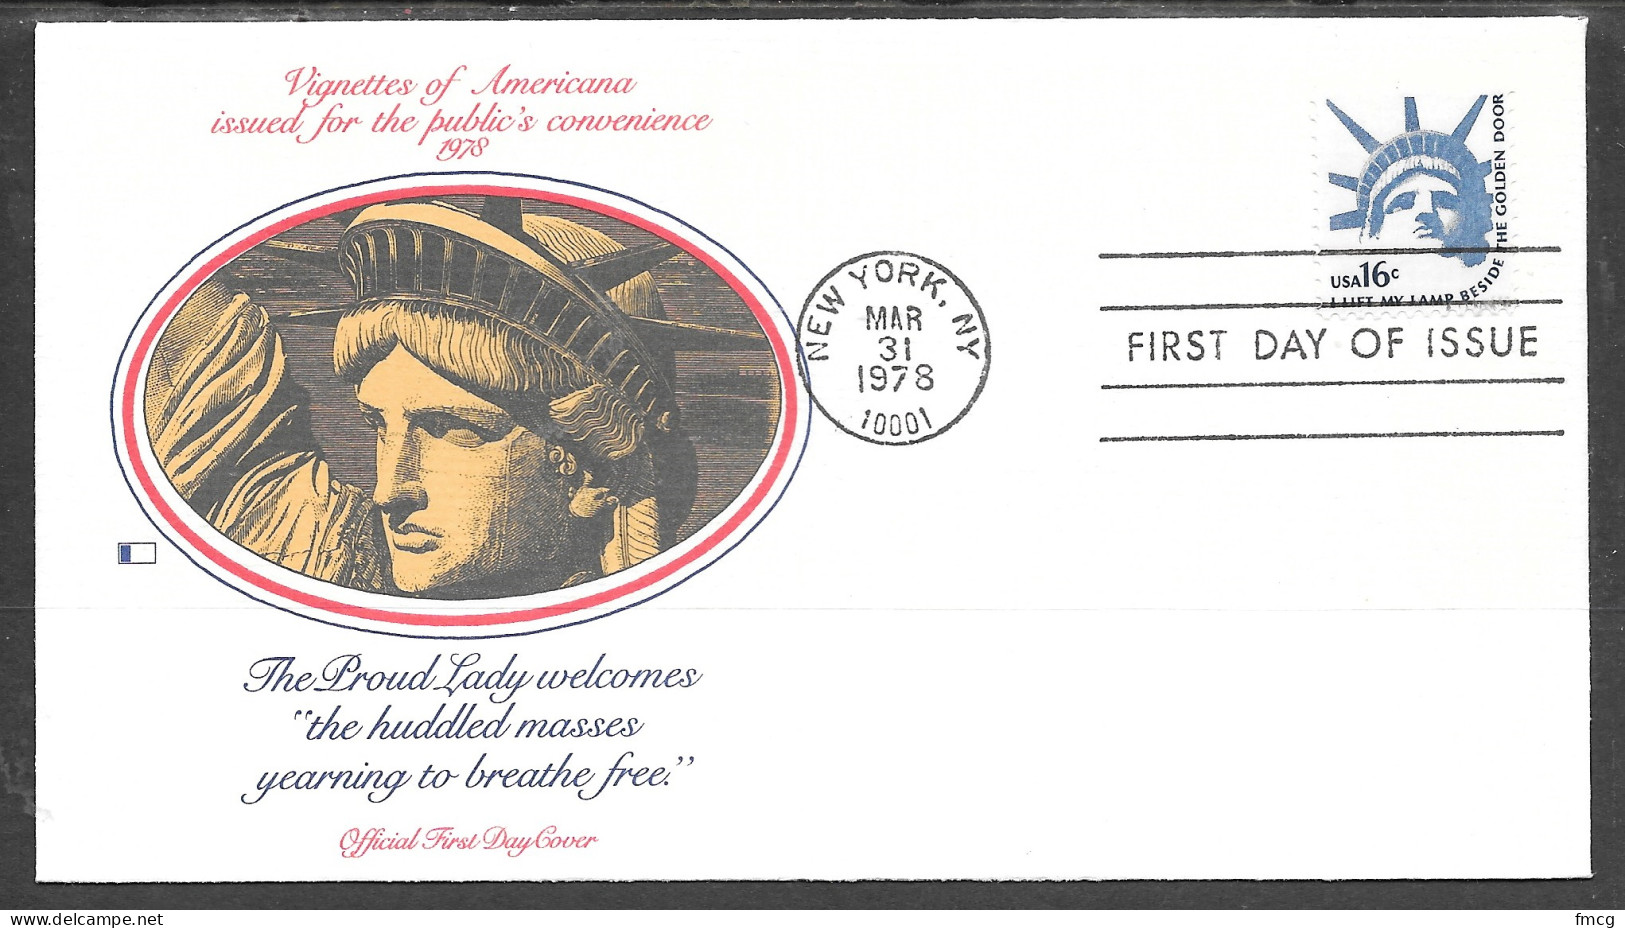 USA FDC Fleetwood Cachet, 16 Cents Statue Of Liberty, Sheet Stamp - 1971-1980